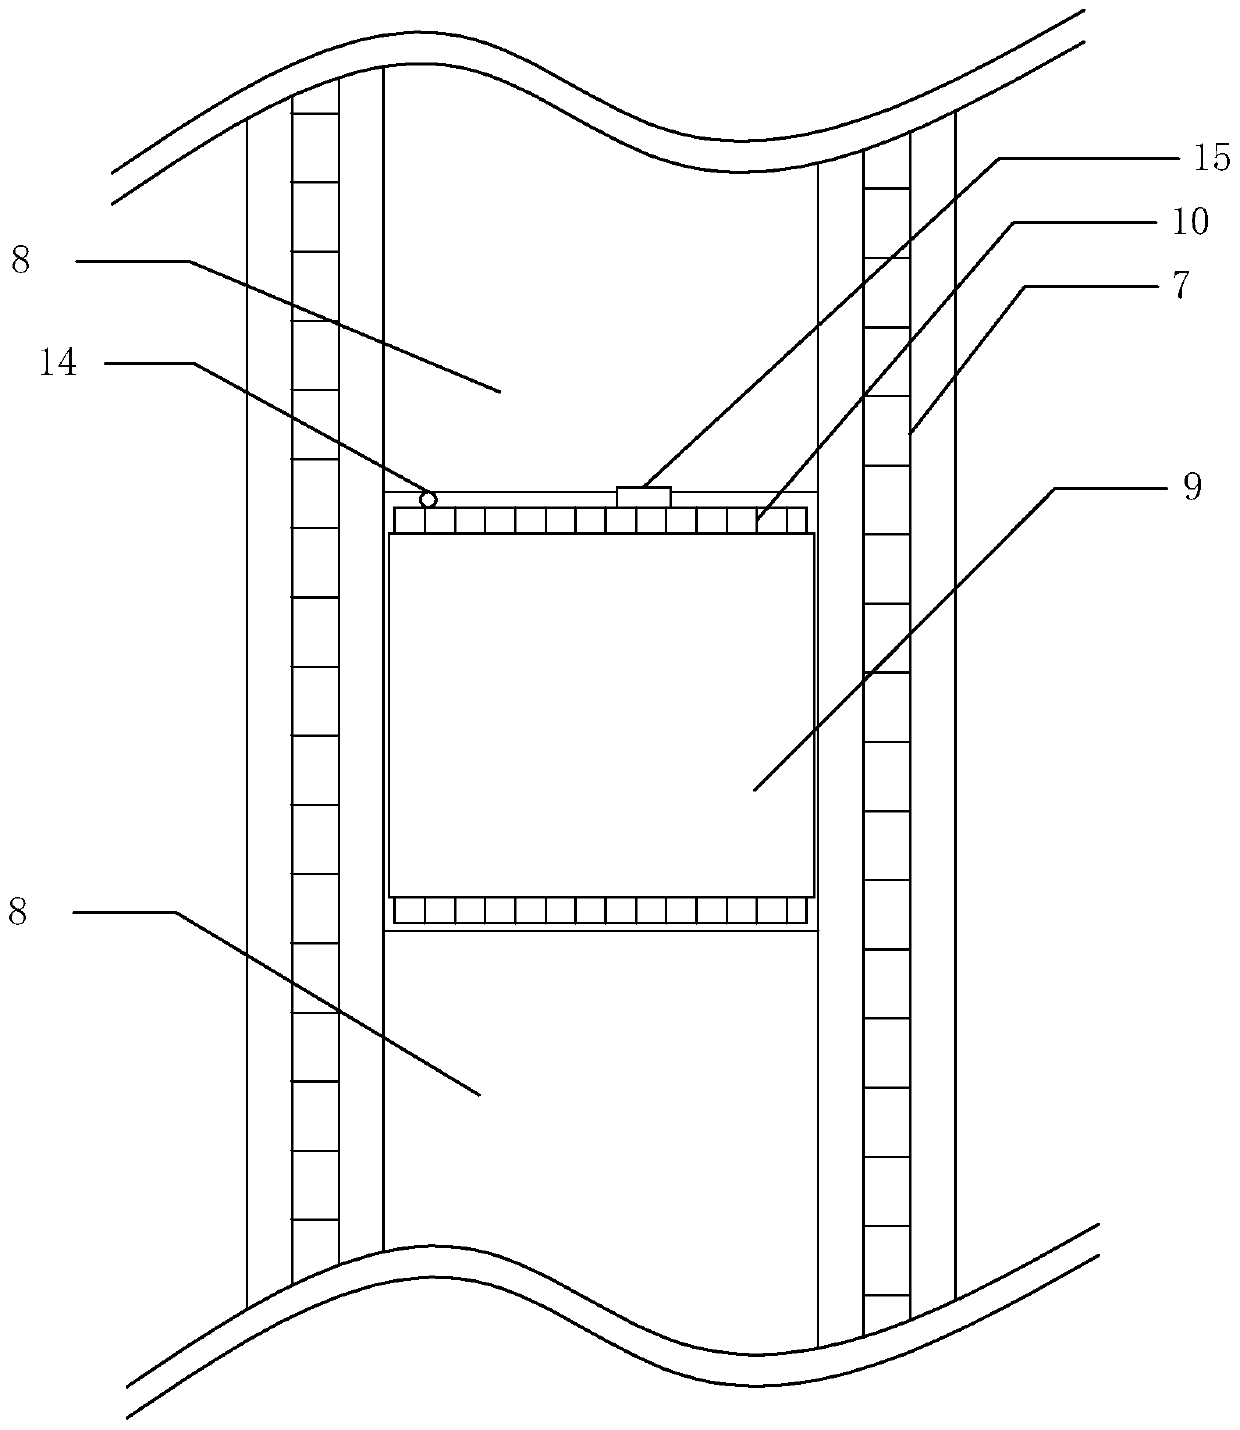 A method for bidirectional conveying and processing of electric motor cover